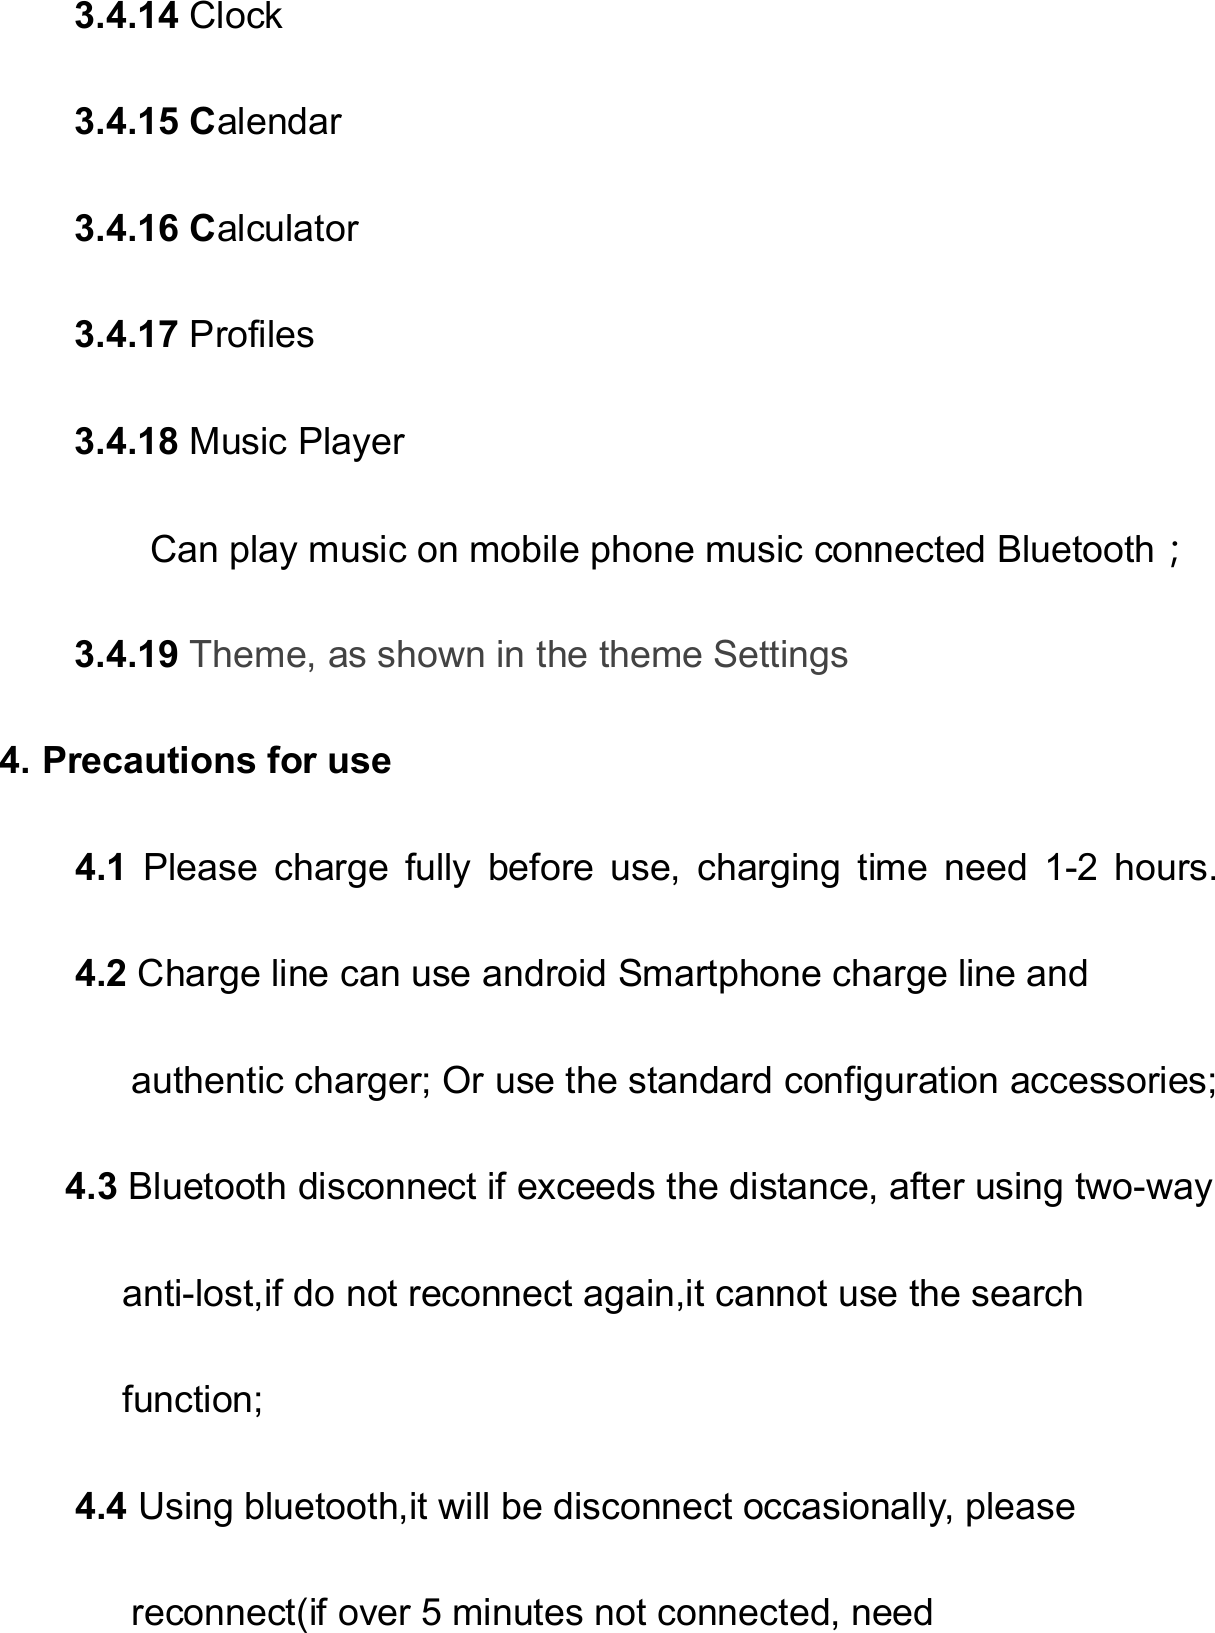   3.4.14 Clock 3.4.15 Calendar 3.4.16 Calculator 3.4.17 Profiles 3.4.18 Music Player         Can play music on mobile phone music connected Bluetooth； 3.4.19 Theme, as shown in the theme Settings 4. Precautions for use     4.1  Please  charge  fully  before  use,  charging  time  need  1-2  hours.     4.2 Charge line can use android Smartphone charge line and          authentic charger; Or use the standard configuration accessories; 4.3 Bluetooth disconnect if exceeds the distance, after using two-way         anti-lost,if do not reconnect again,it cannot use the search        function; 4.4 Using bluetooth,it will be disconnect occasionally, please       reconnect(if over 5 minutes not connected, need 